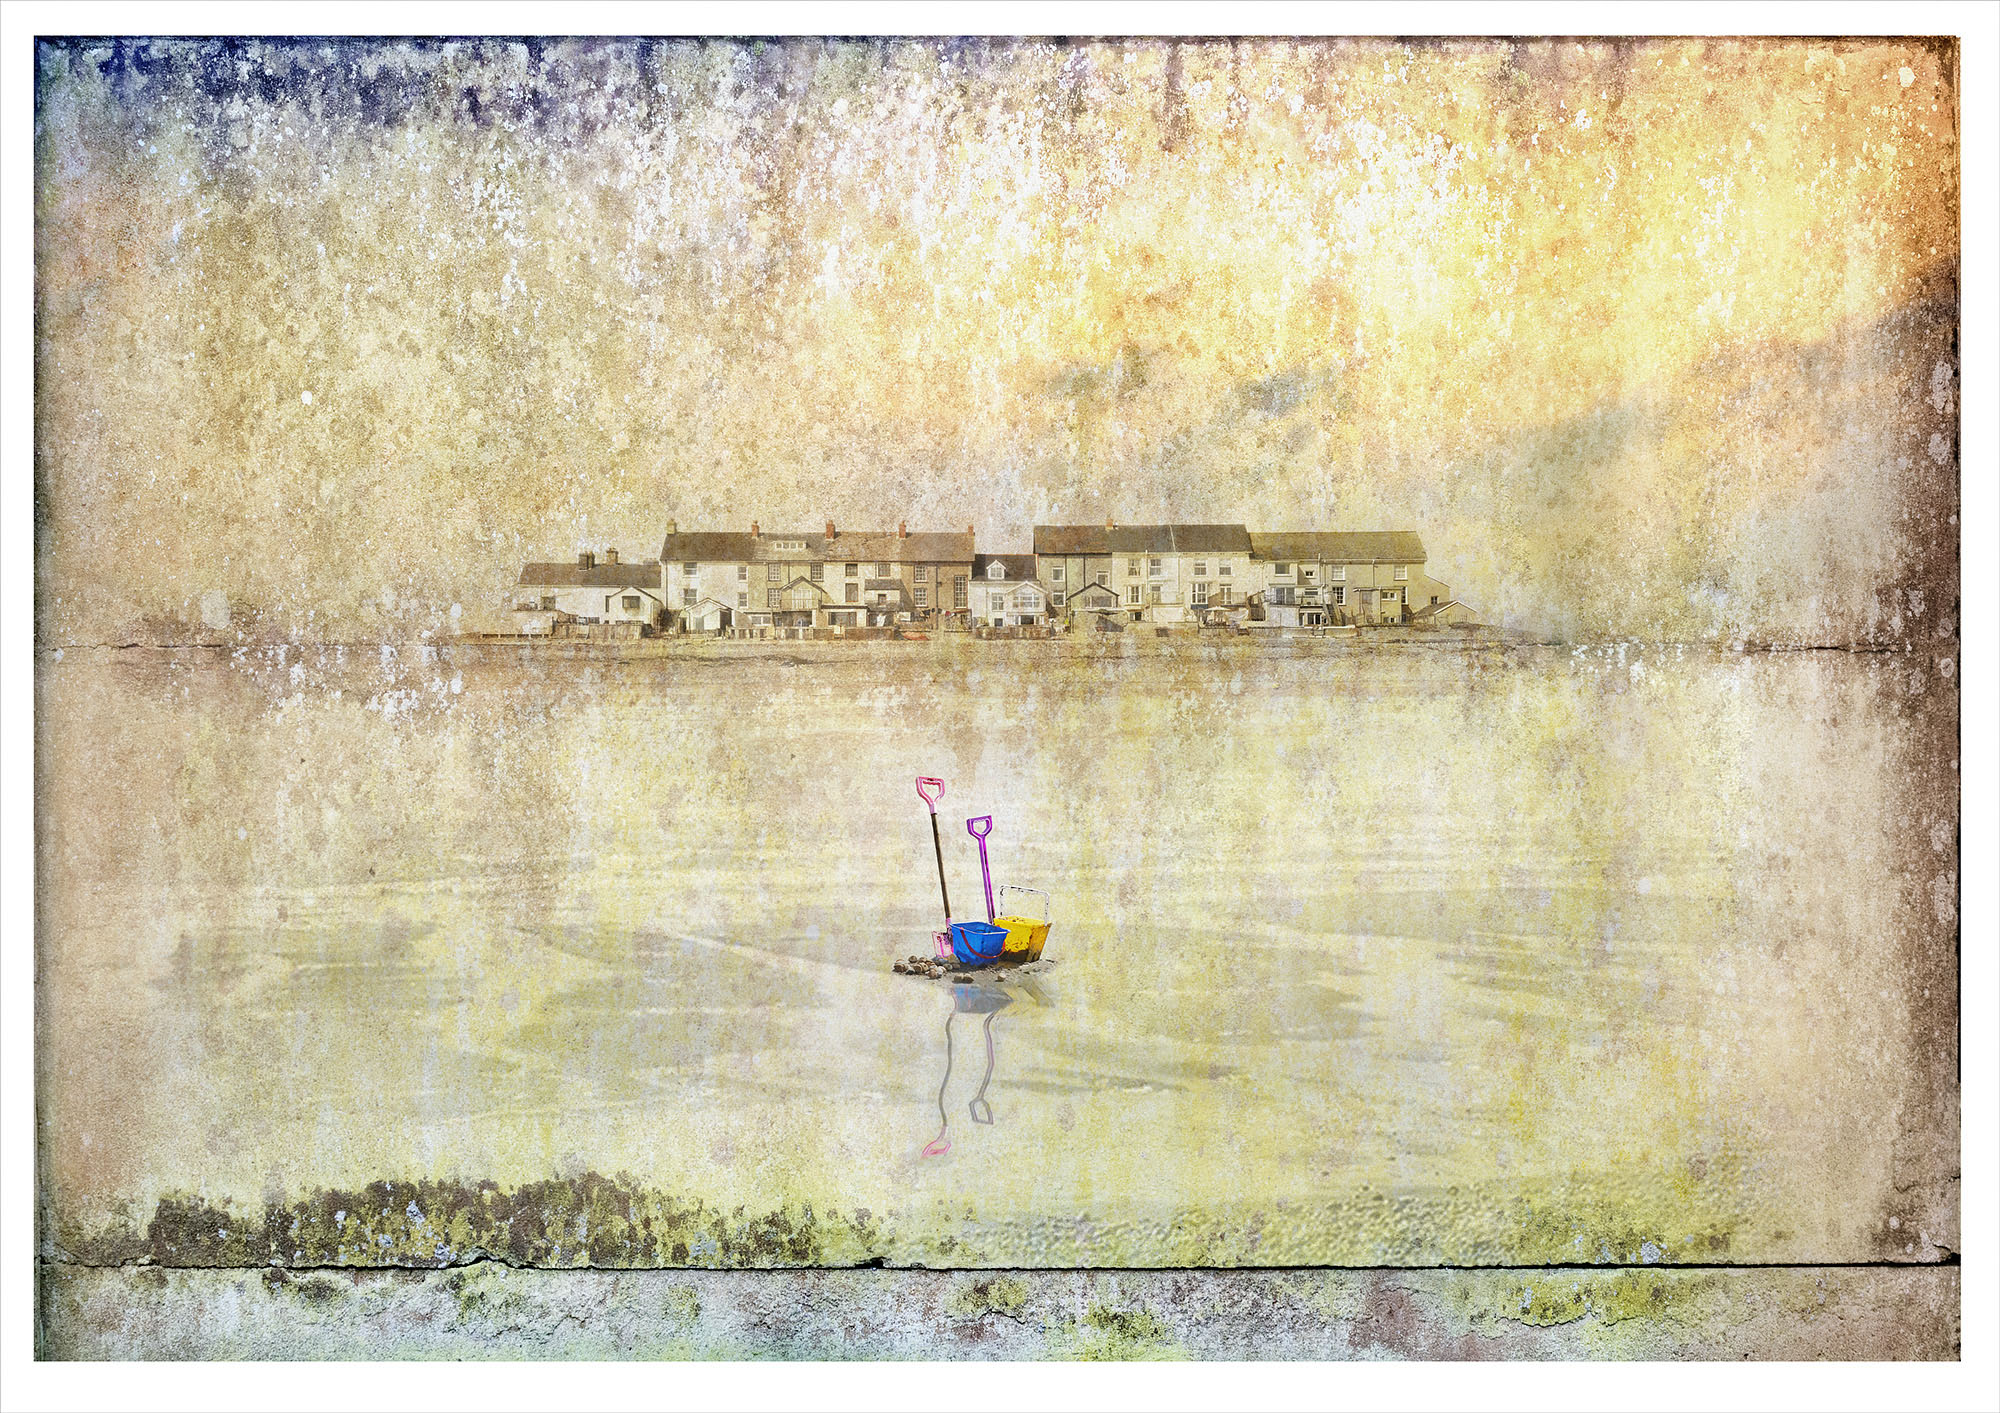 wet sand as if looking across an estuary to a row of distant houses. Childrens plastic bucket and spade in foreground